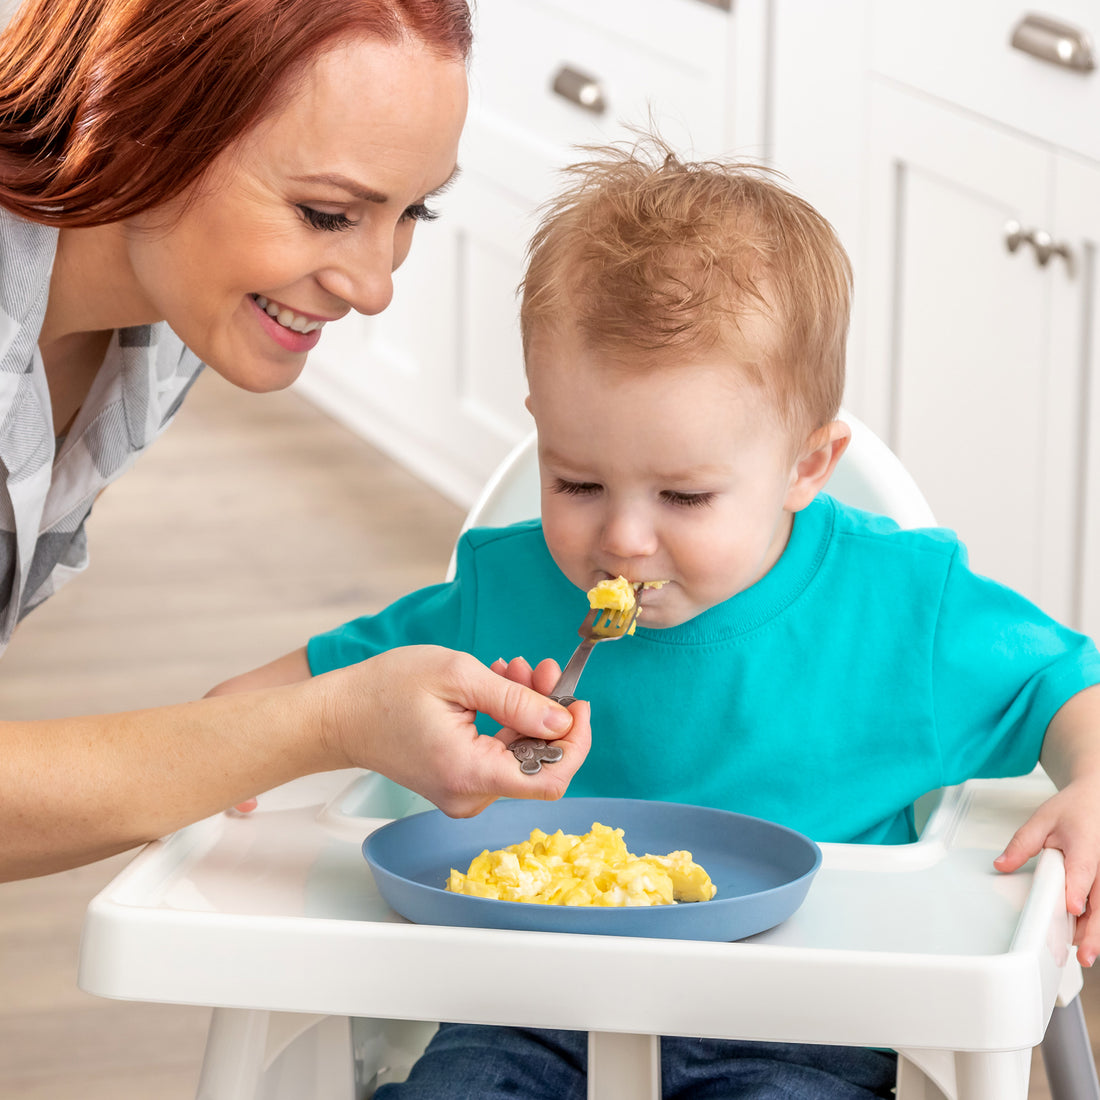 Feeding essentials for 1-2 year olds - Our favorite plates, sippy cups,  bibs and more! 